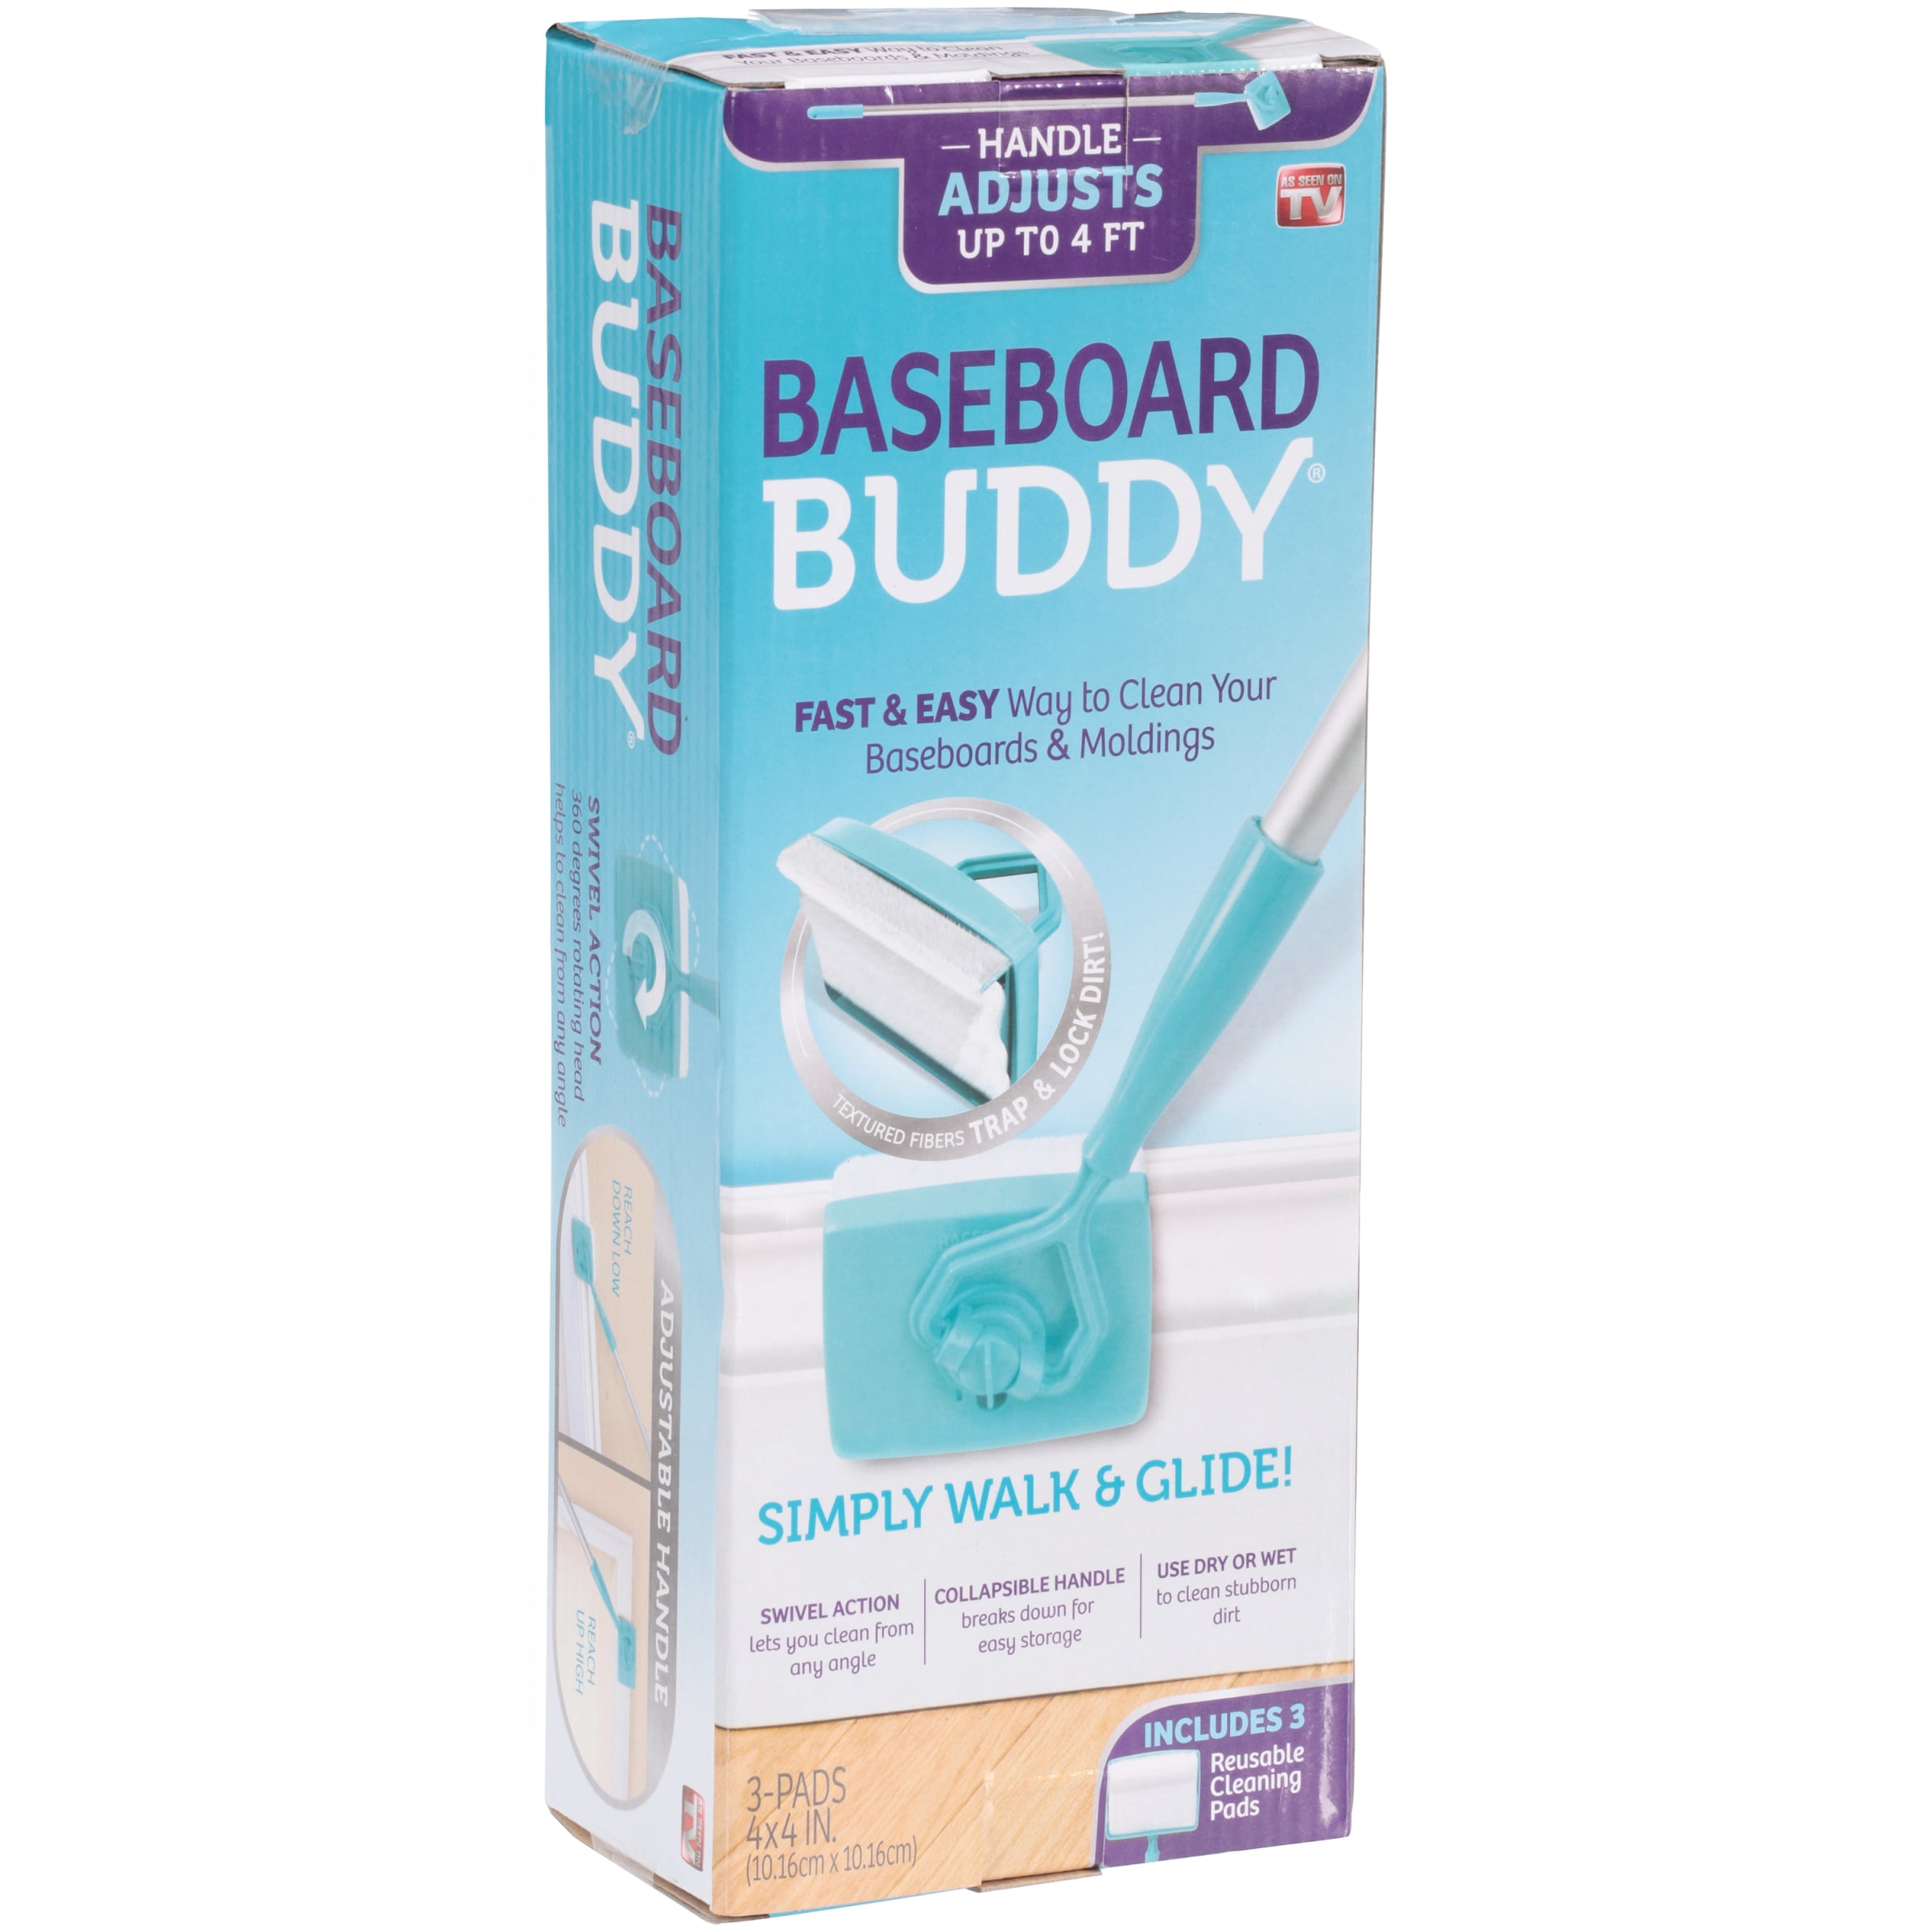 Baseboard Buddy Review: Does it Work? 